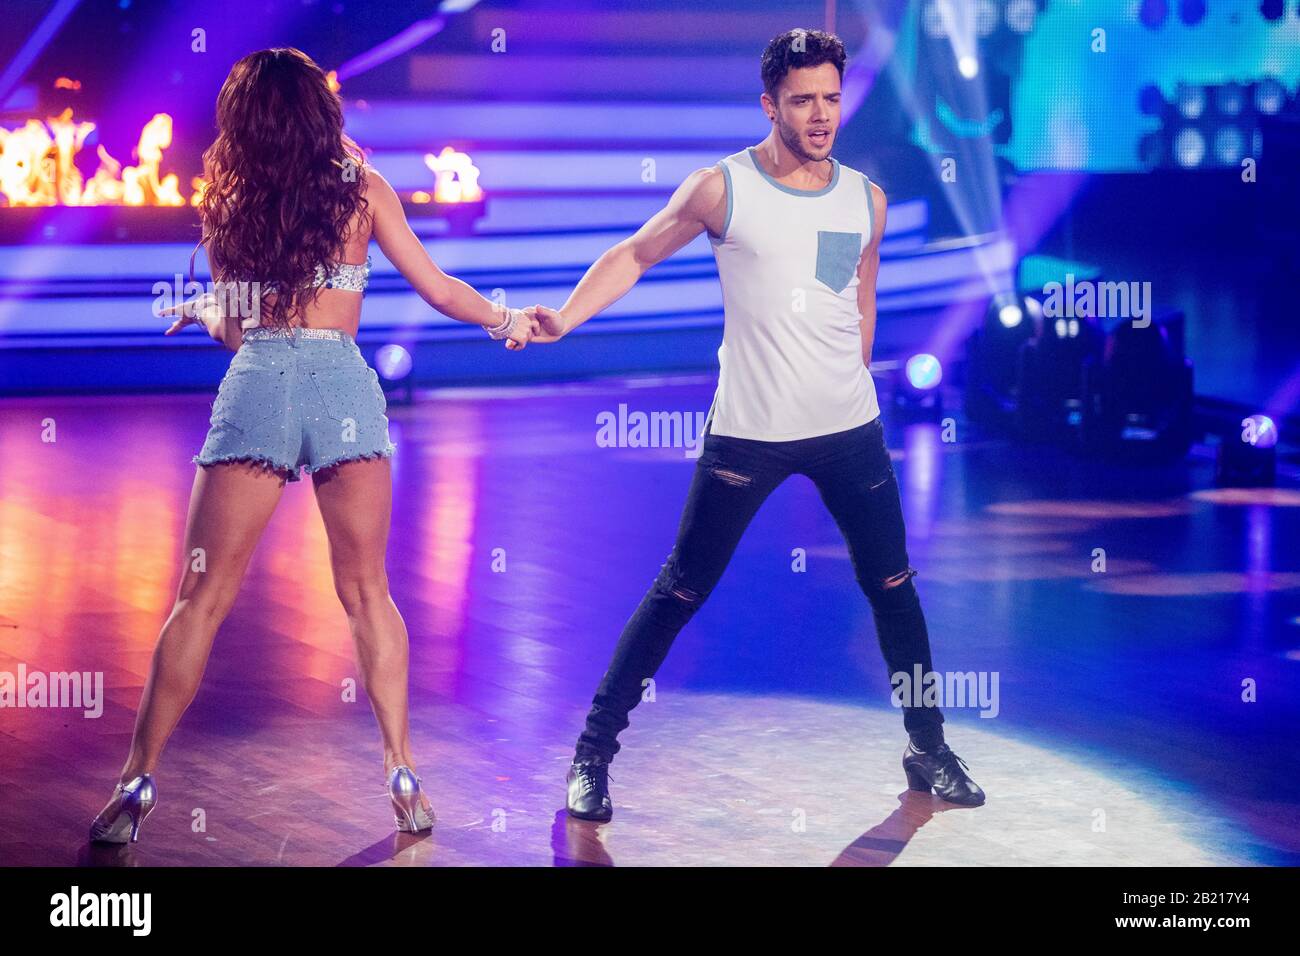 Cologne Germany 28th Feb 2020 Luca Hanni Singer And Christina Luft Professional Dancer Dance In The Rtl Dance Show Let S Dance At The Coloneum Credit Rolf Vennenbernd Dpa Alamy Live News Stock Photo